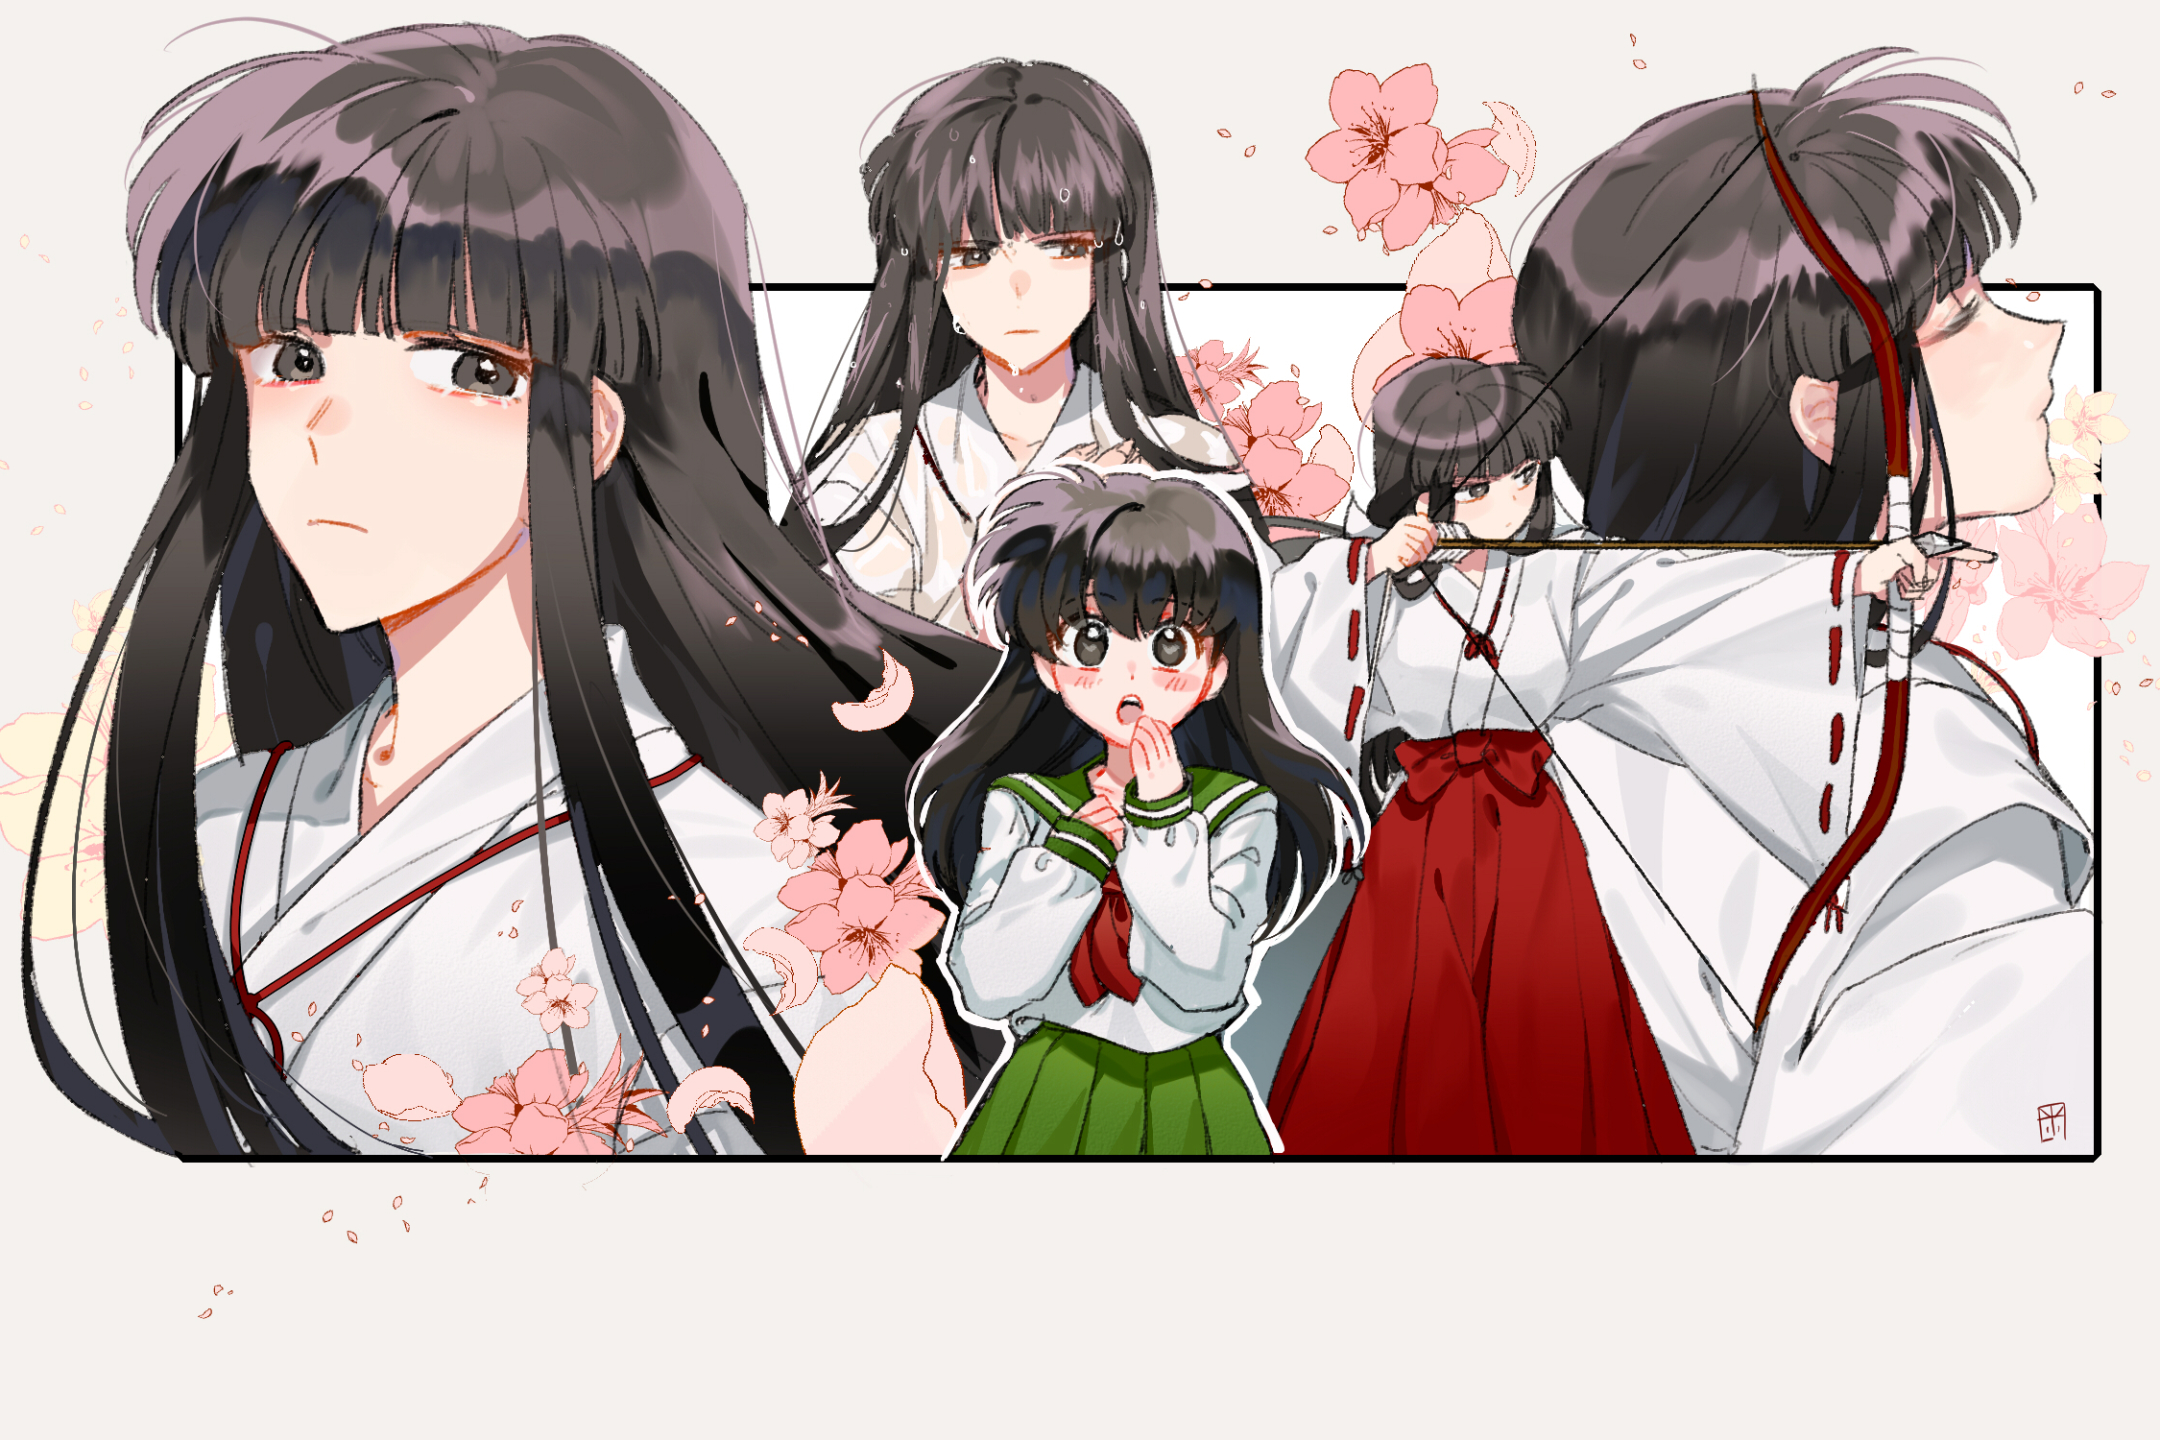 Inuyasha and Kagome Wallpapers Discover more anime Inuyasha Kagome Kagome  Higurashi Manga wallpaper httpswwwkolpaperc  Anime Top anime  series Inuyasha